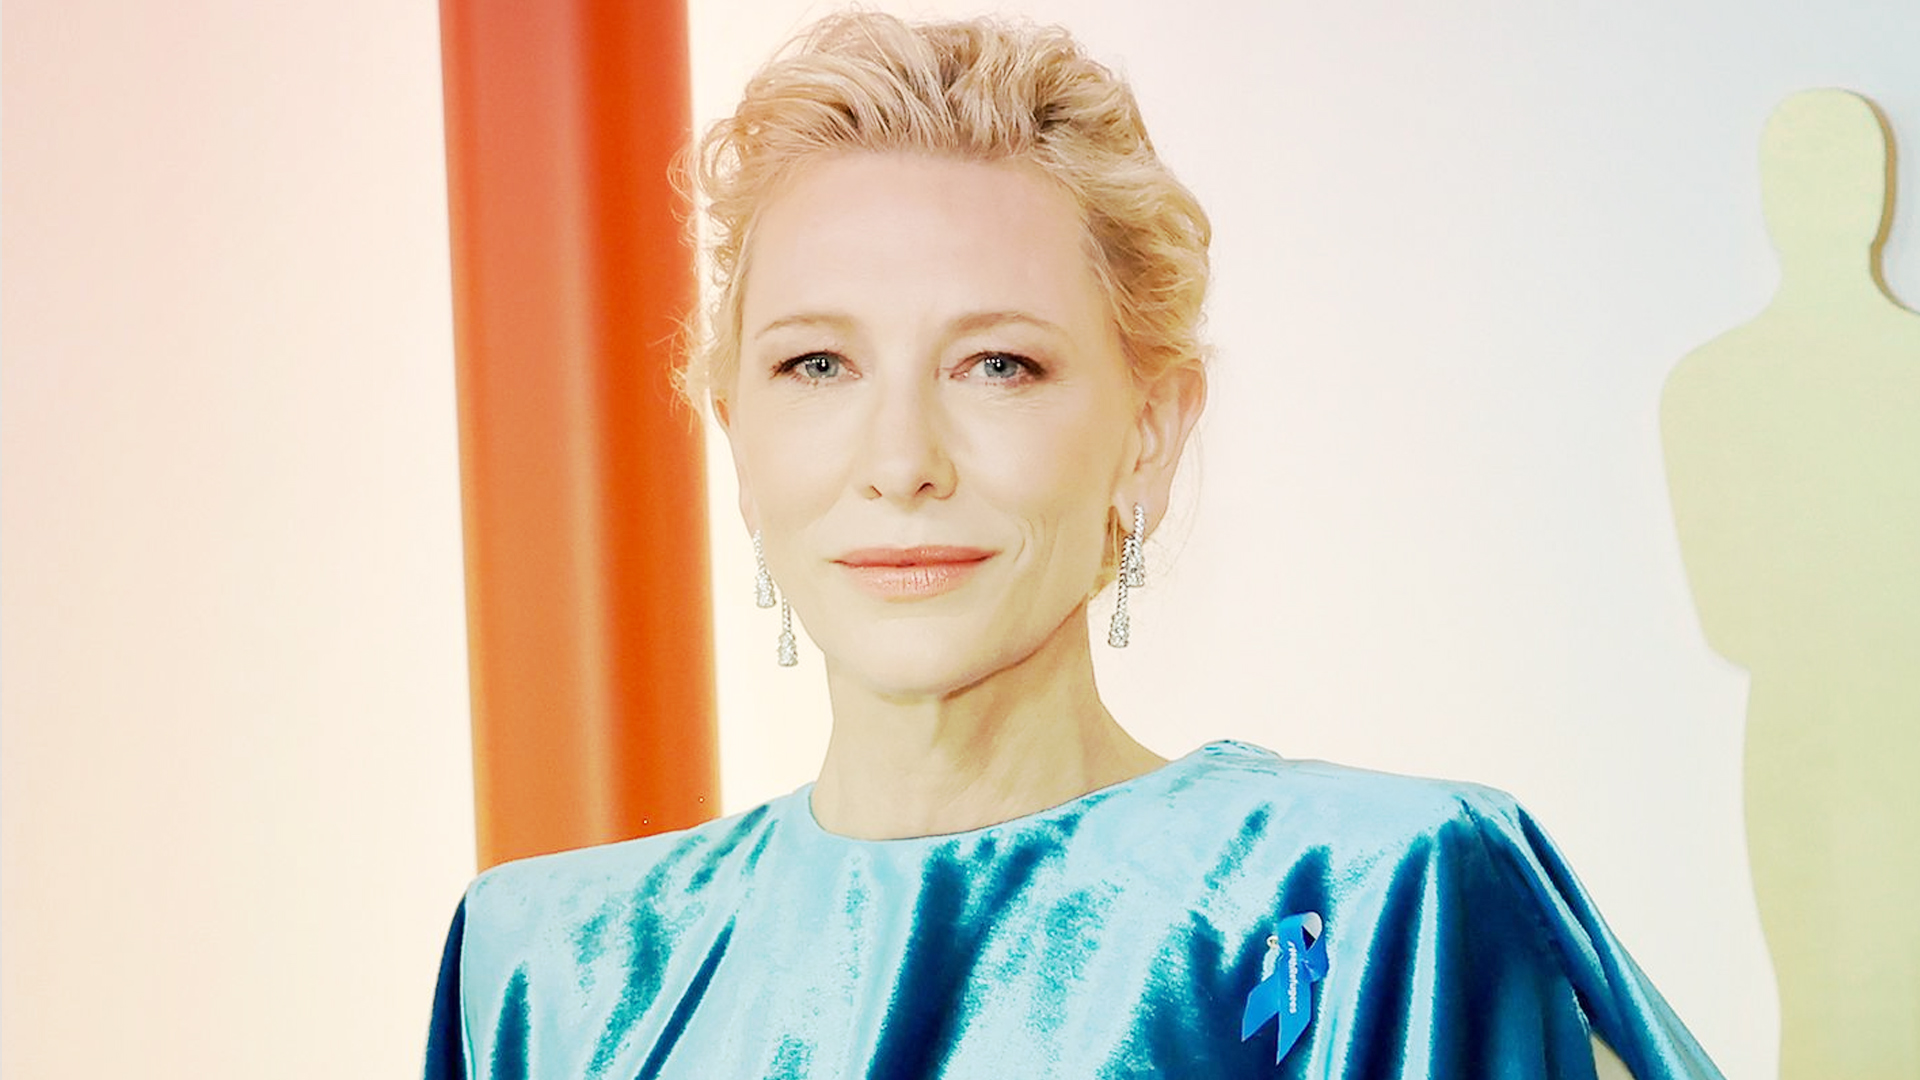 How Many Siblings Does Cate Blanchett Have?